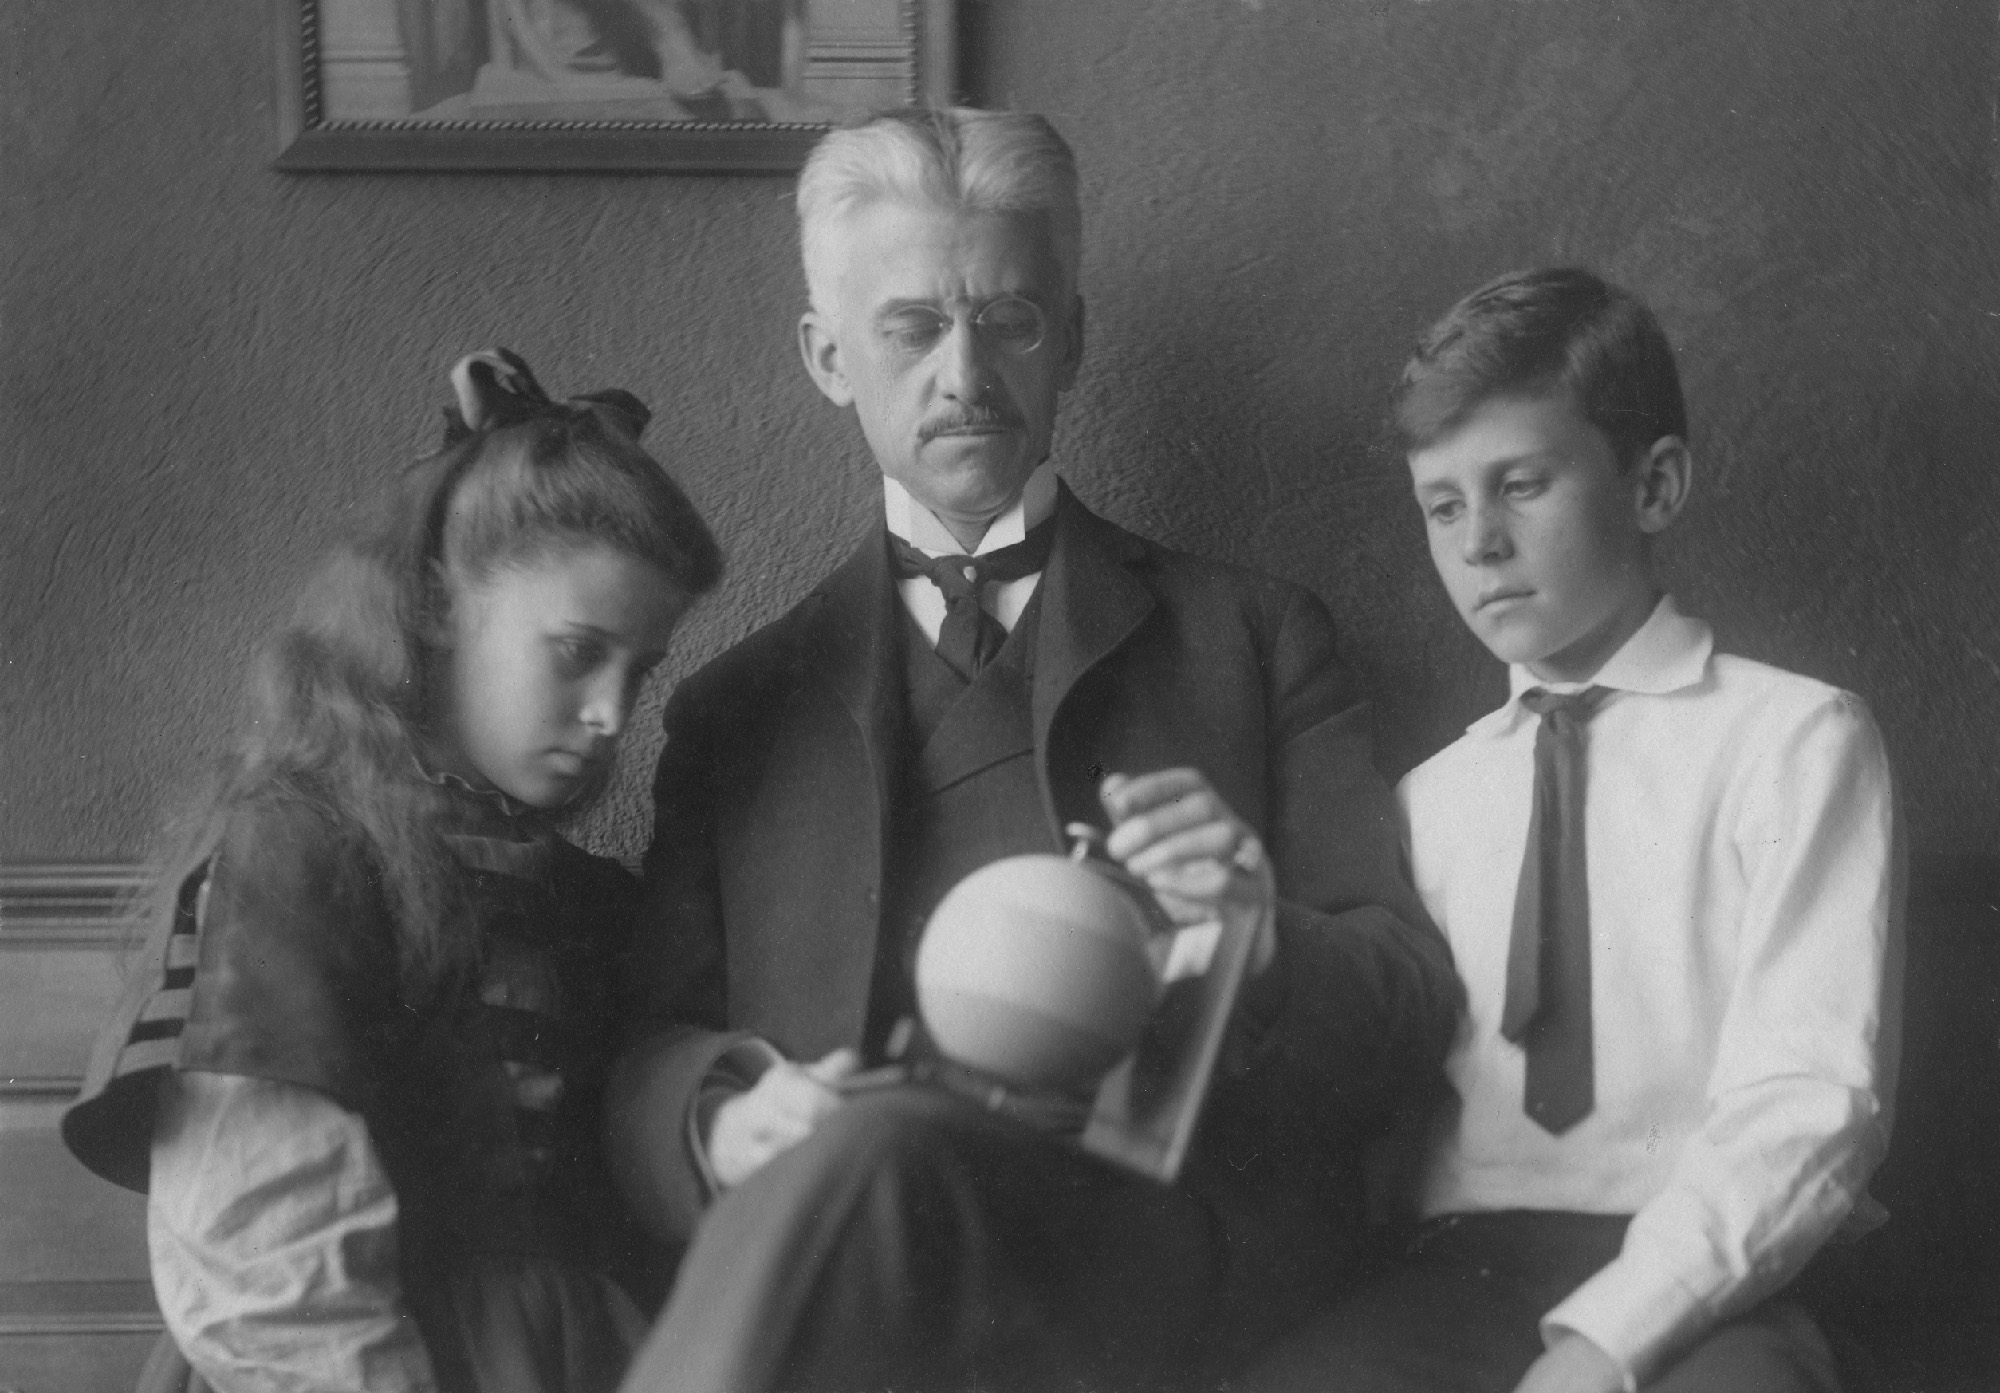 Black and white image of two children on either side of a man holding a striped sphere.